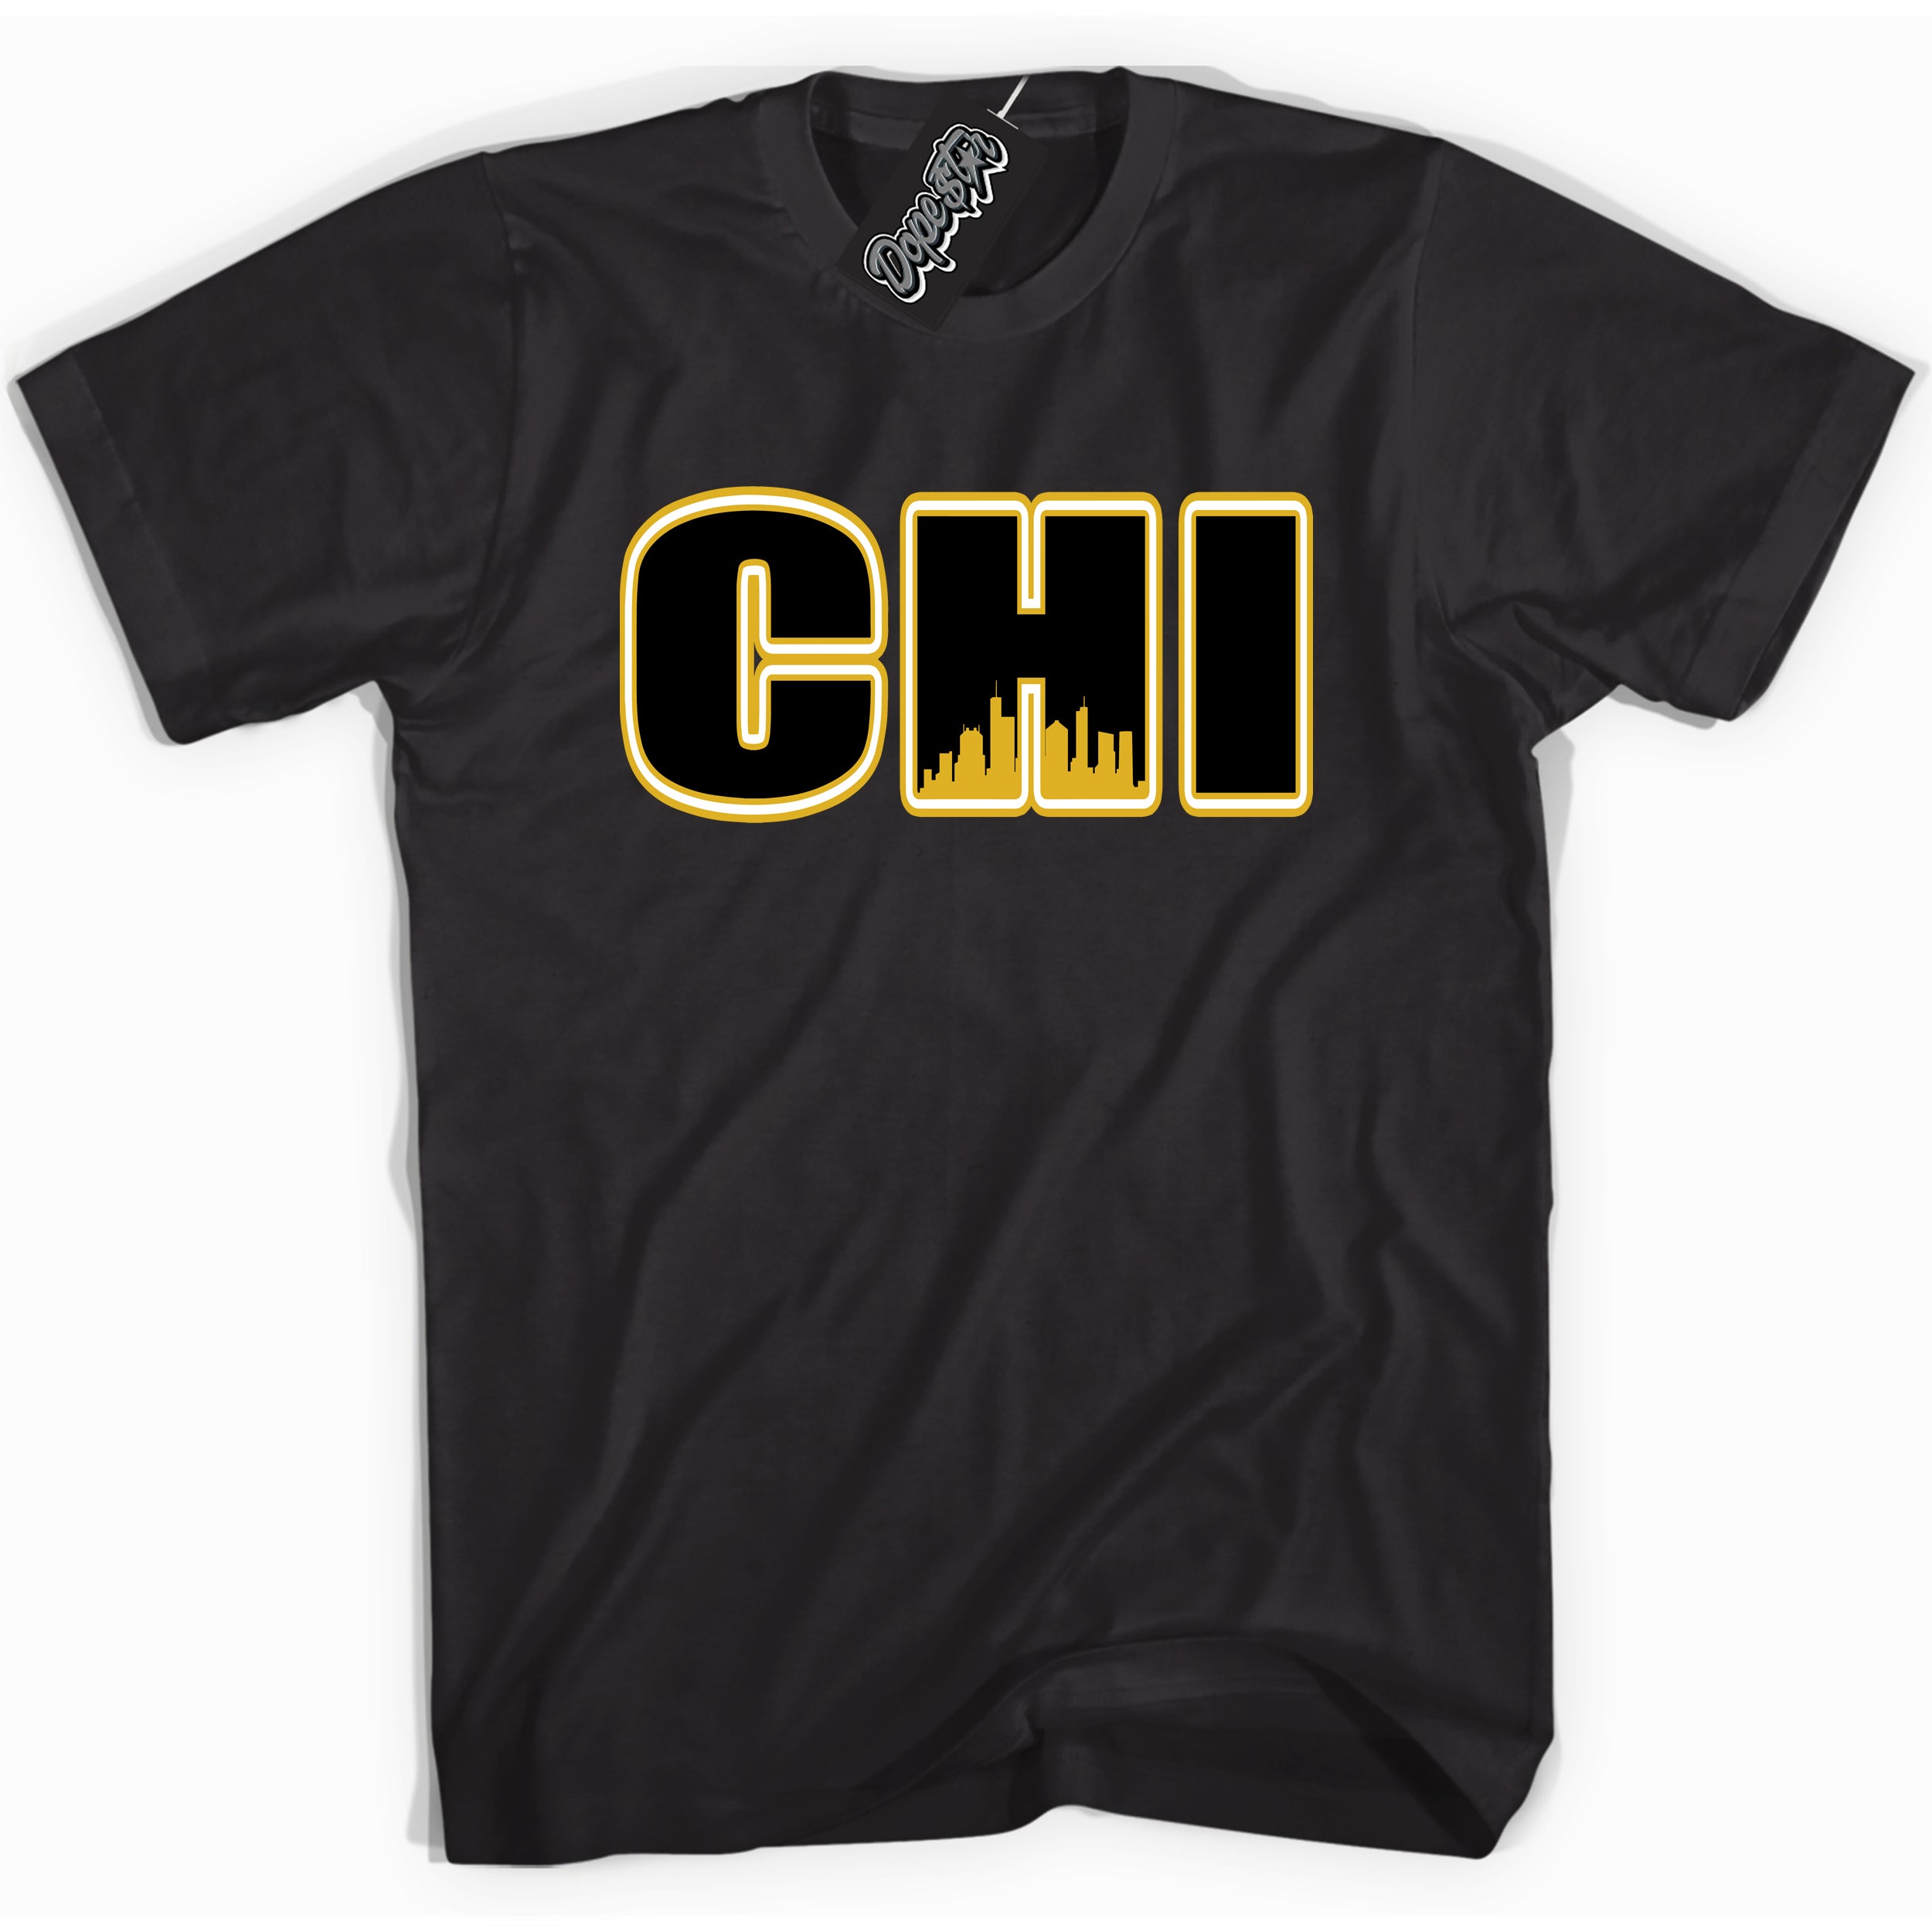 Cool Black Shirt with “ Chicago ” design that perfectly matches Yellow Ochre 6s Sneakers.